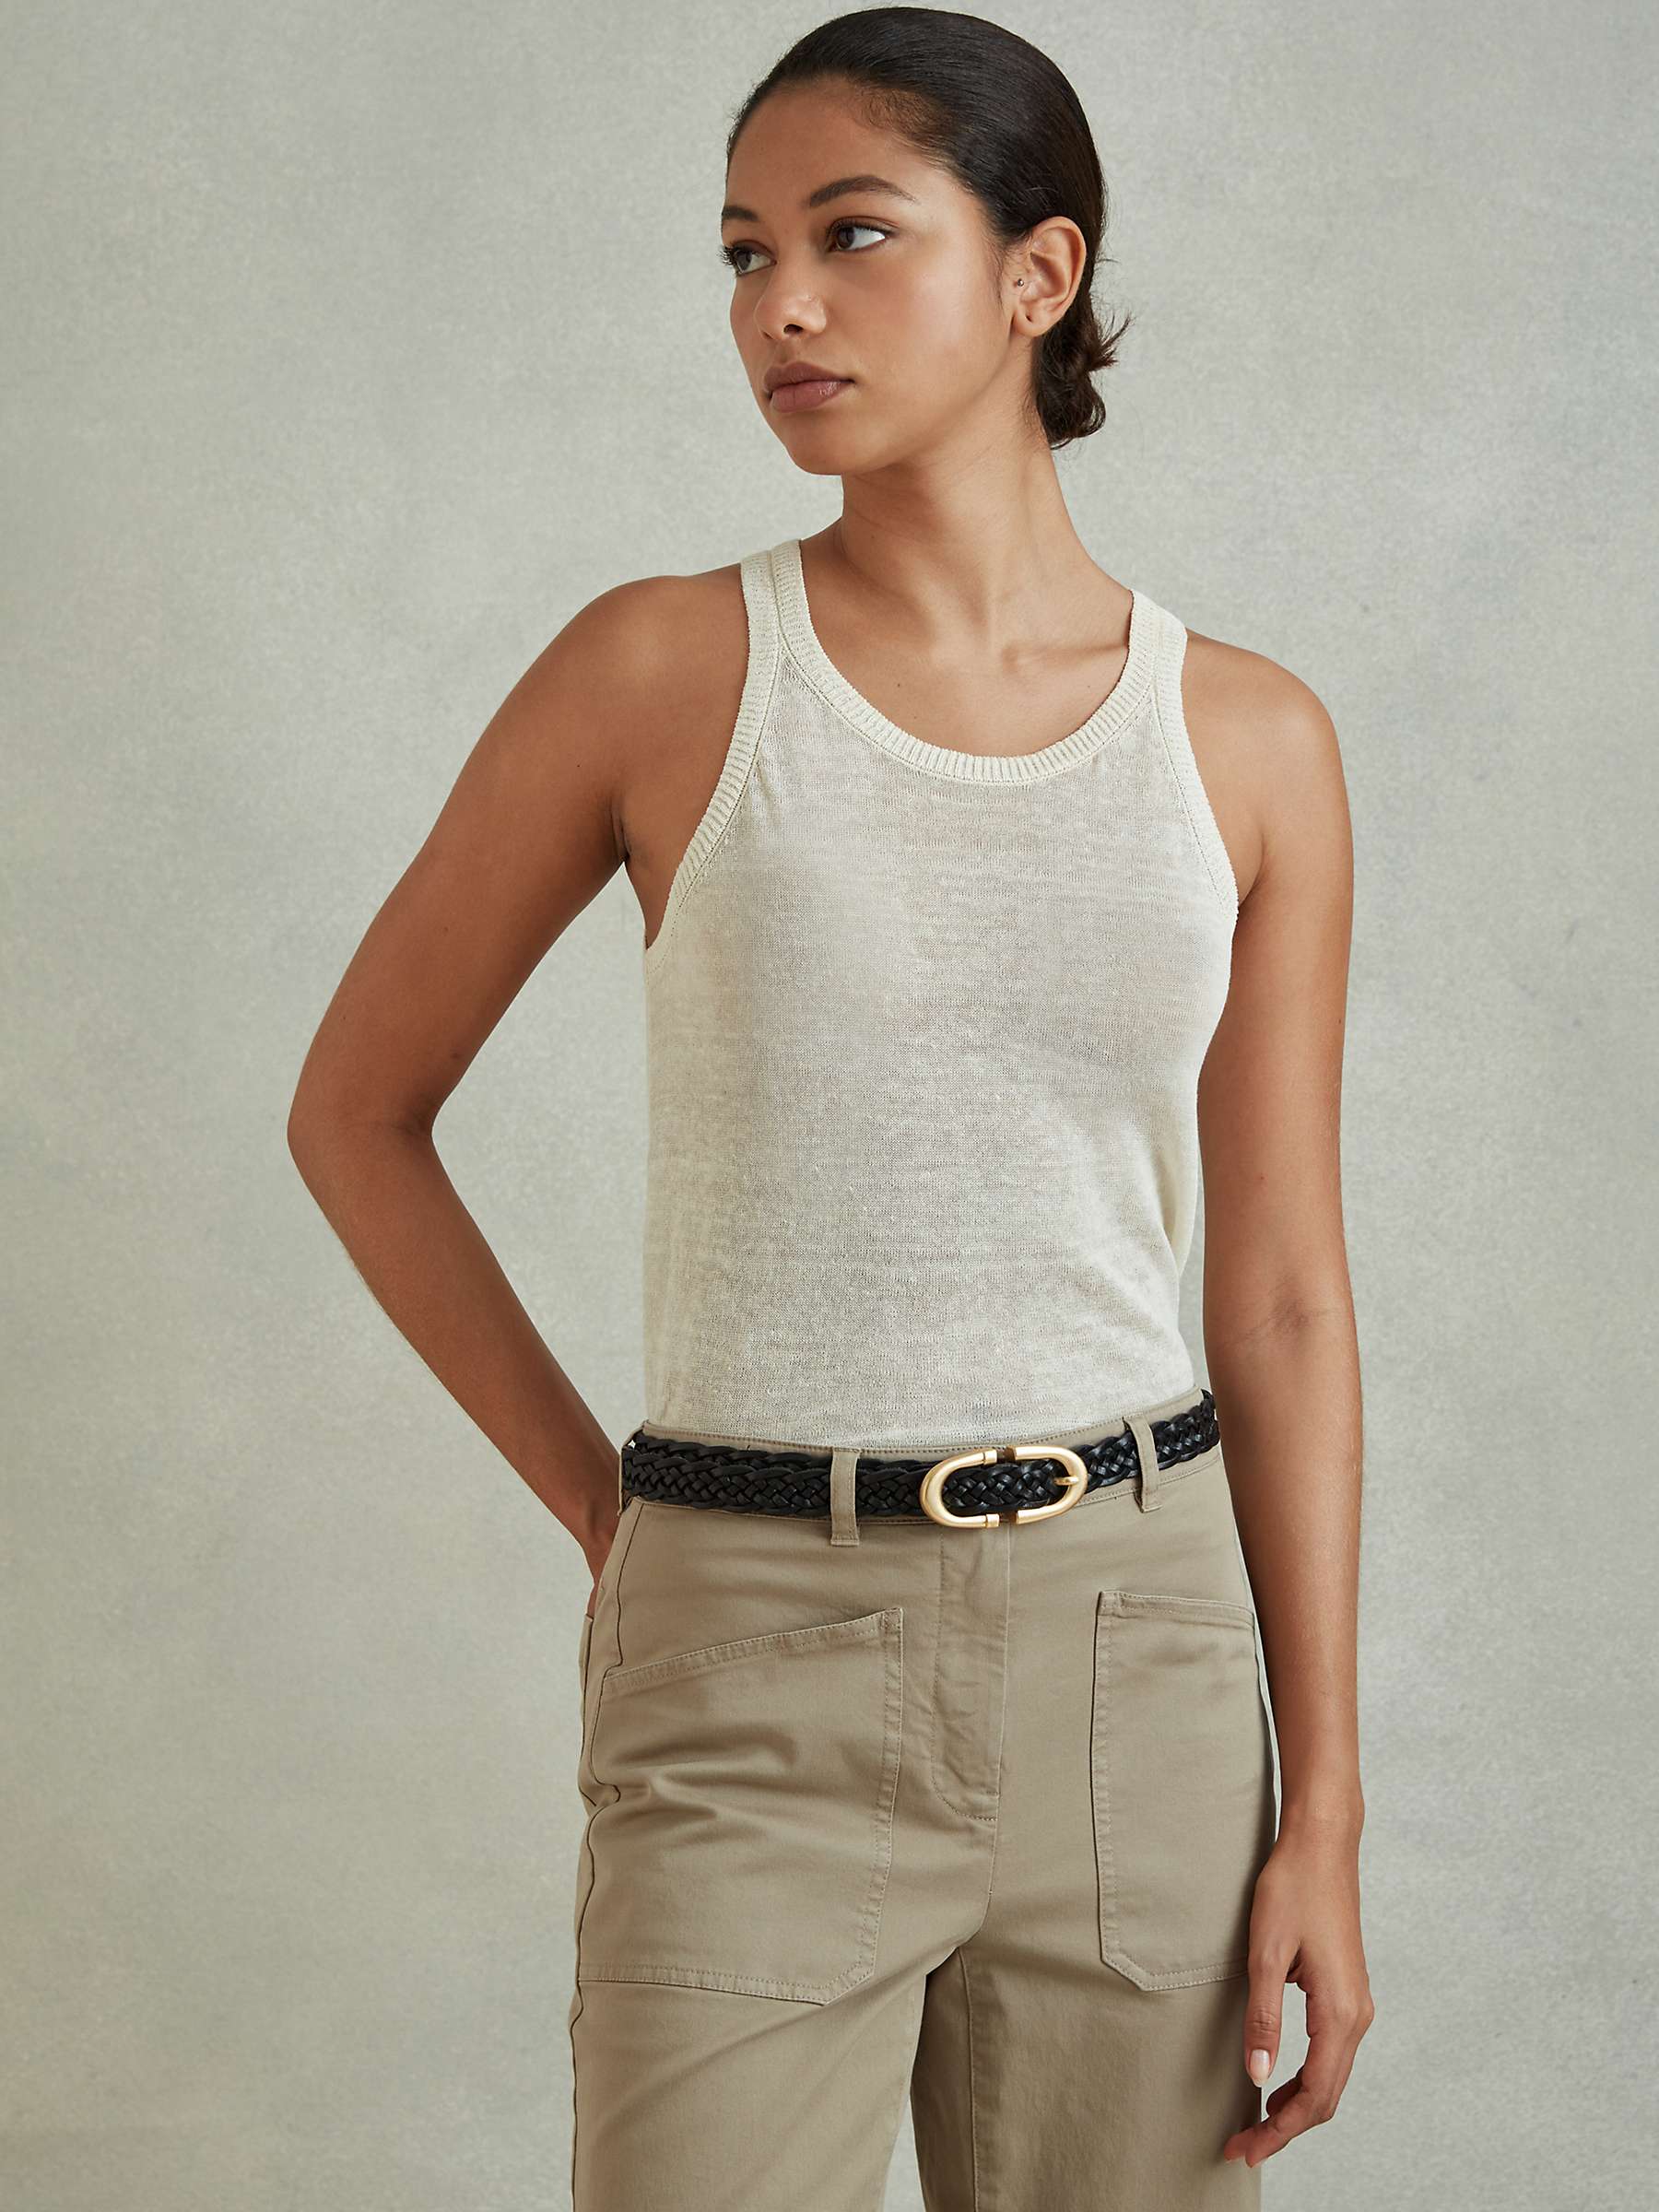 Buy Reiss Bailey Woven Leather Belt Online at johnlewis.com